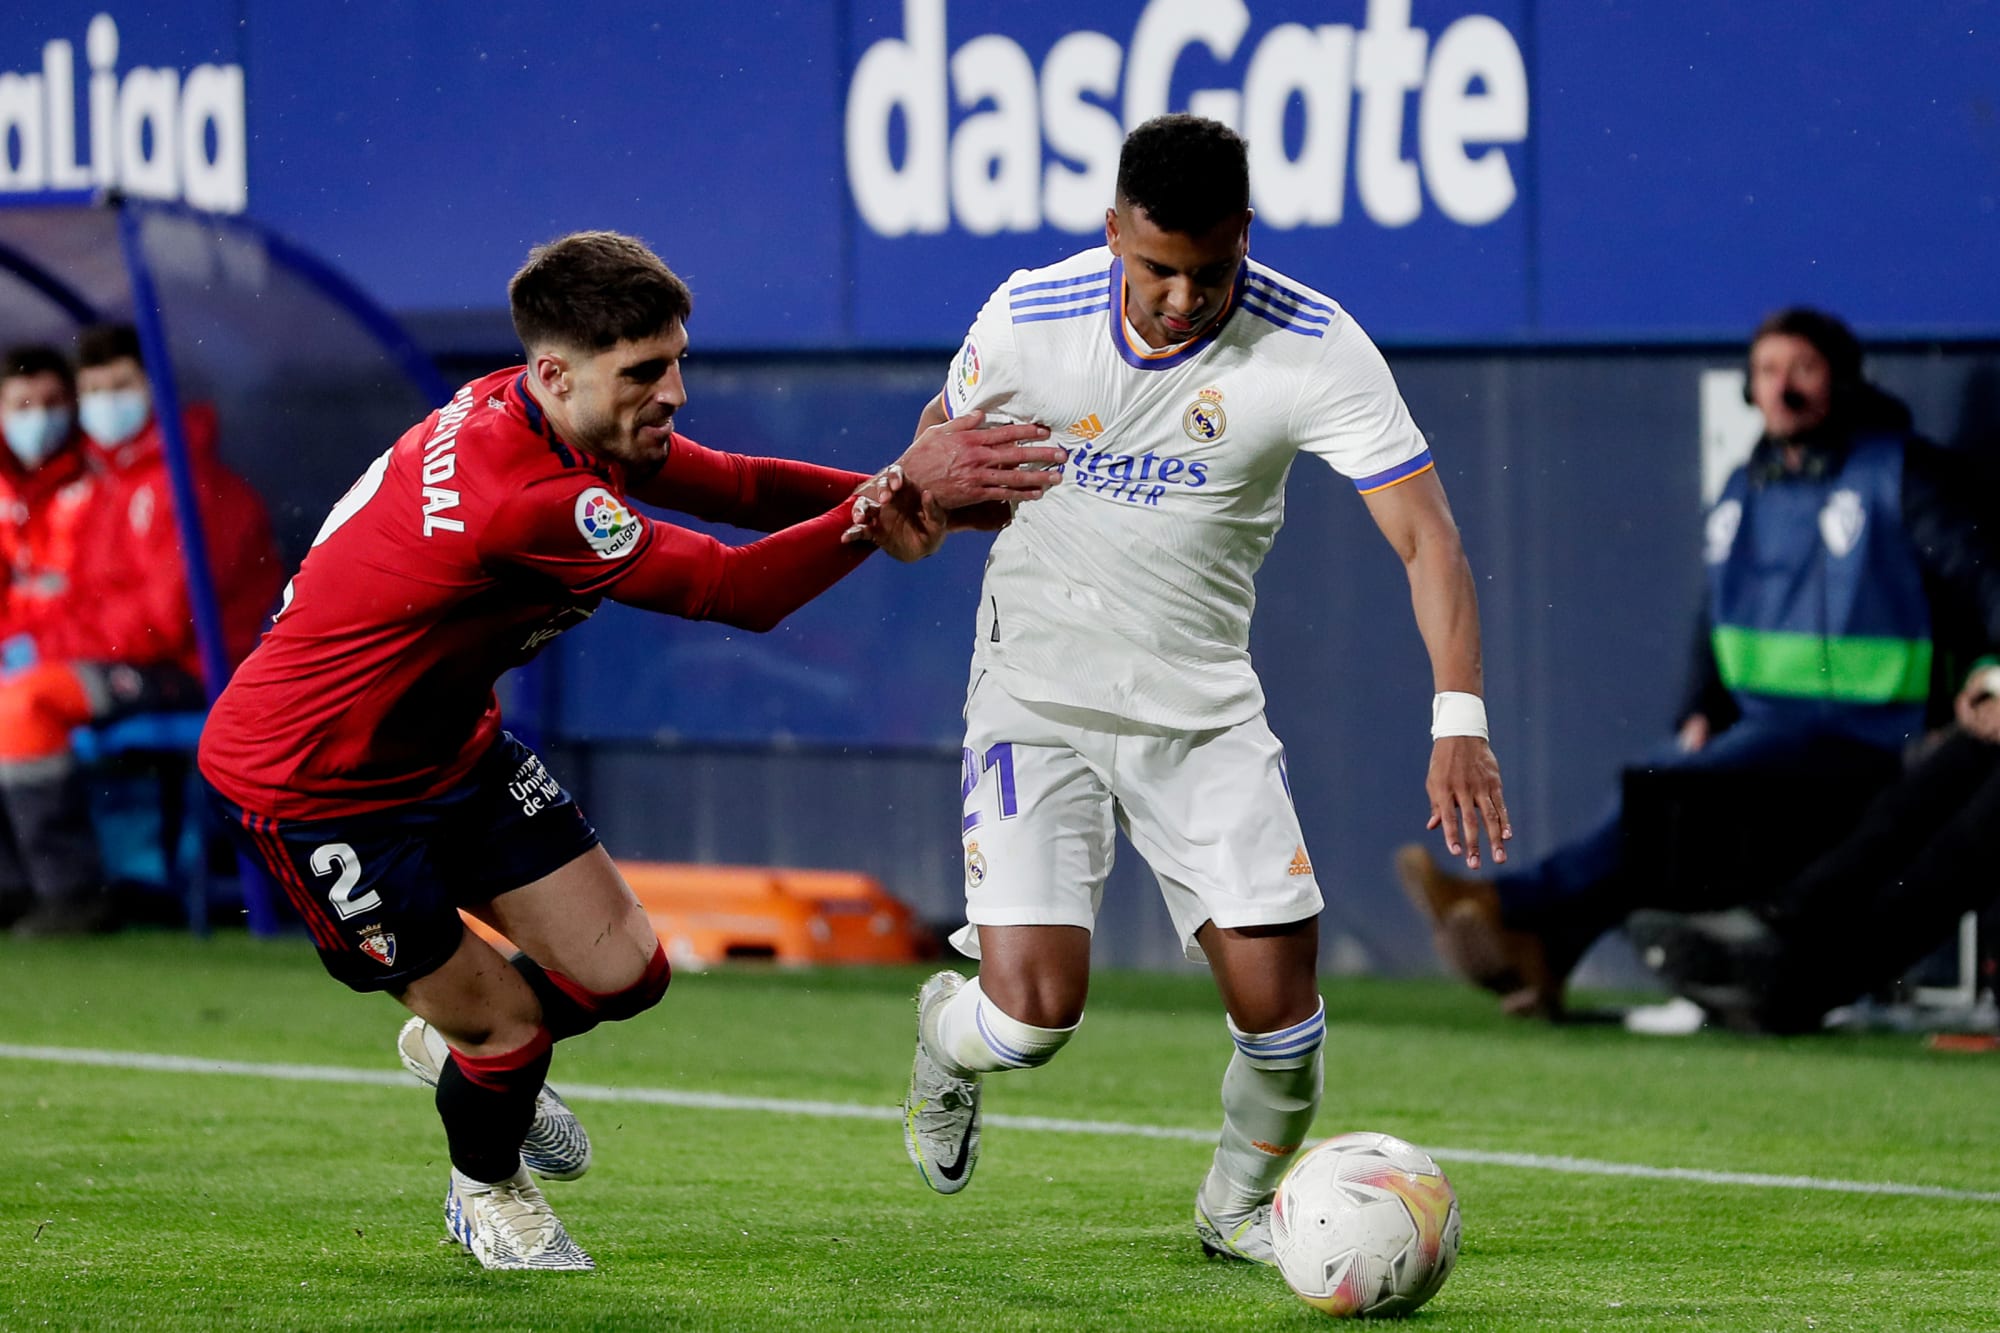  Osasuna 1-3 Real Madrid: Player Ratings as Rodrygo Goes drops another masterclass